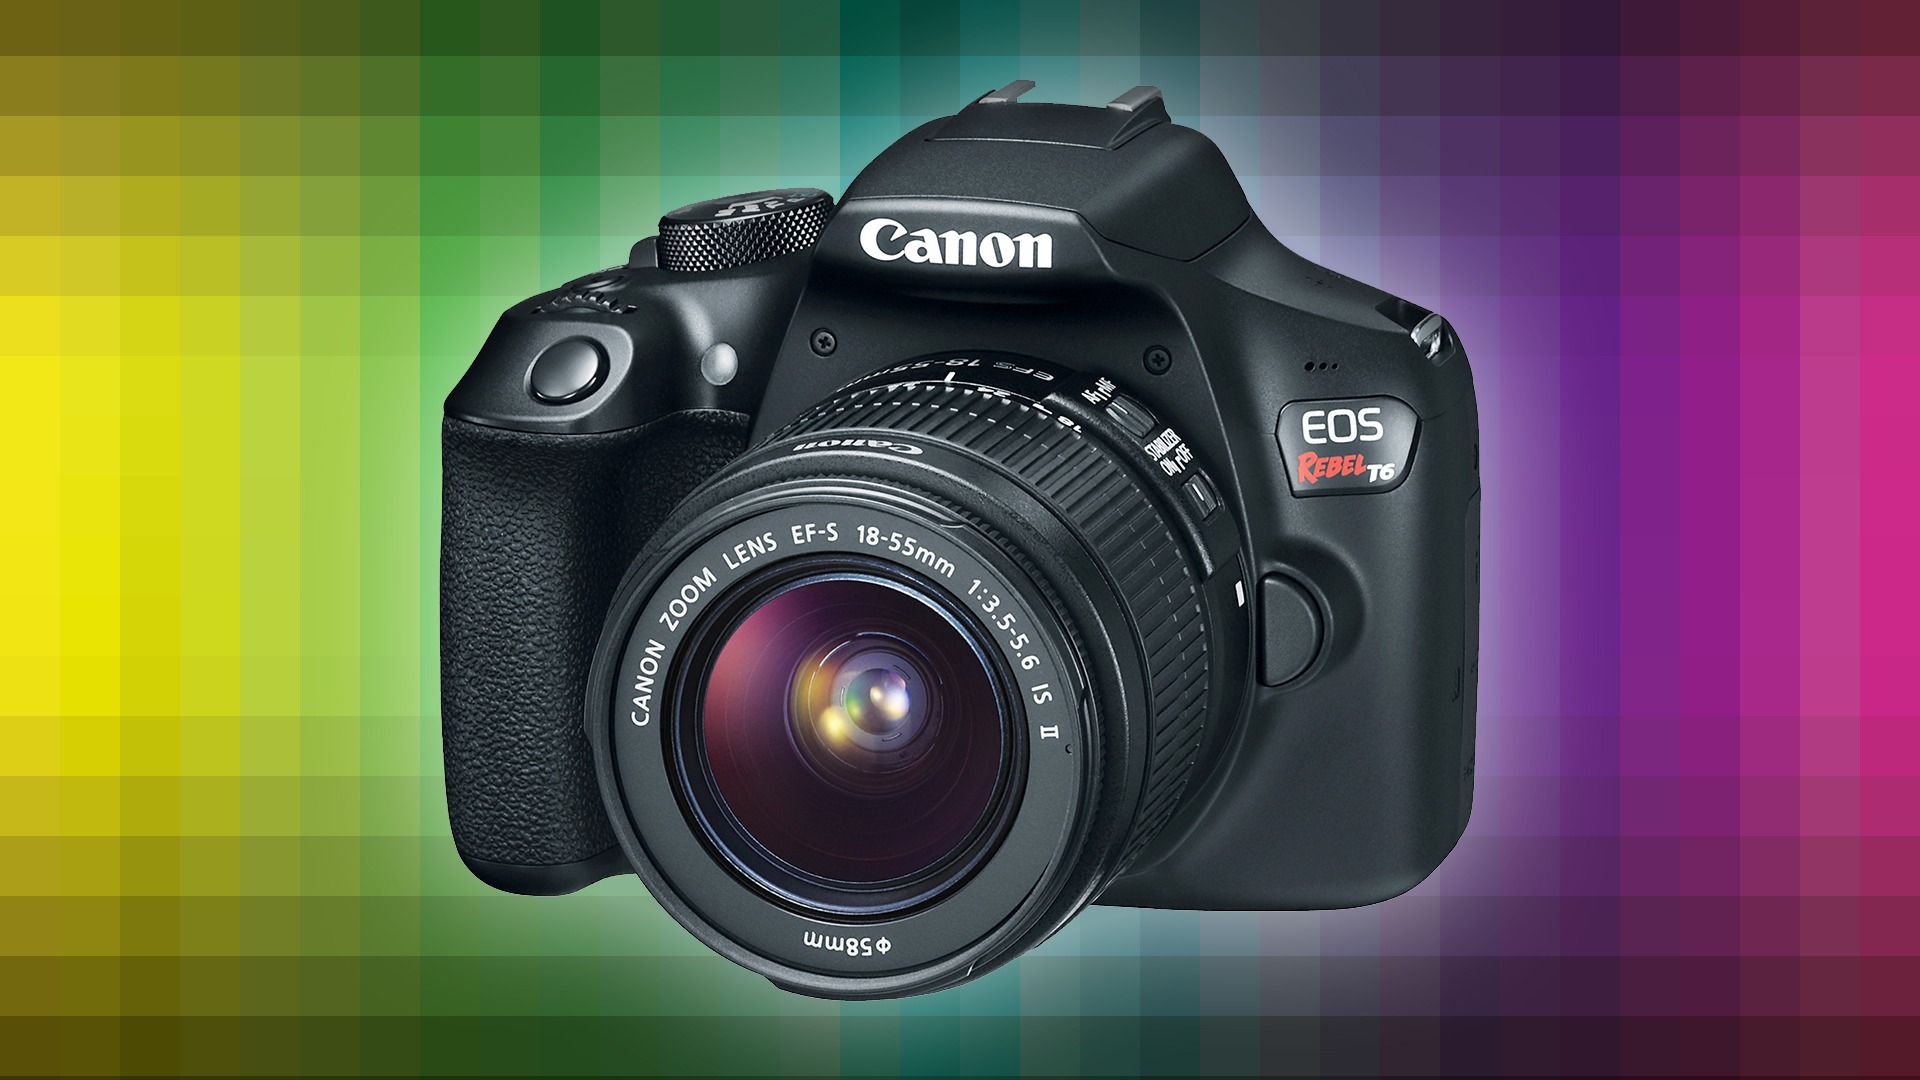 Built-in Wi-Fi and NFC support make the EOS 1300D the needs of social media users.